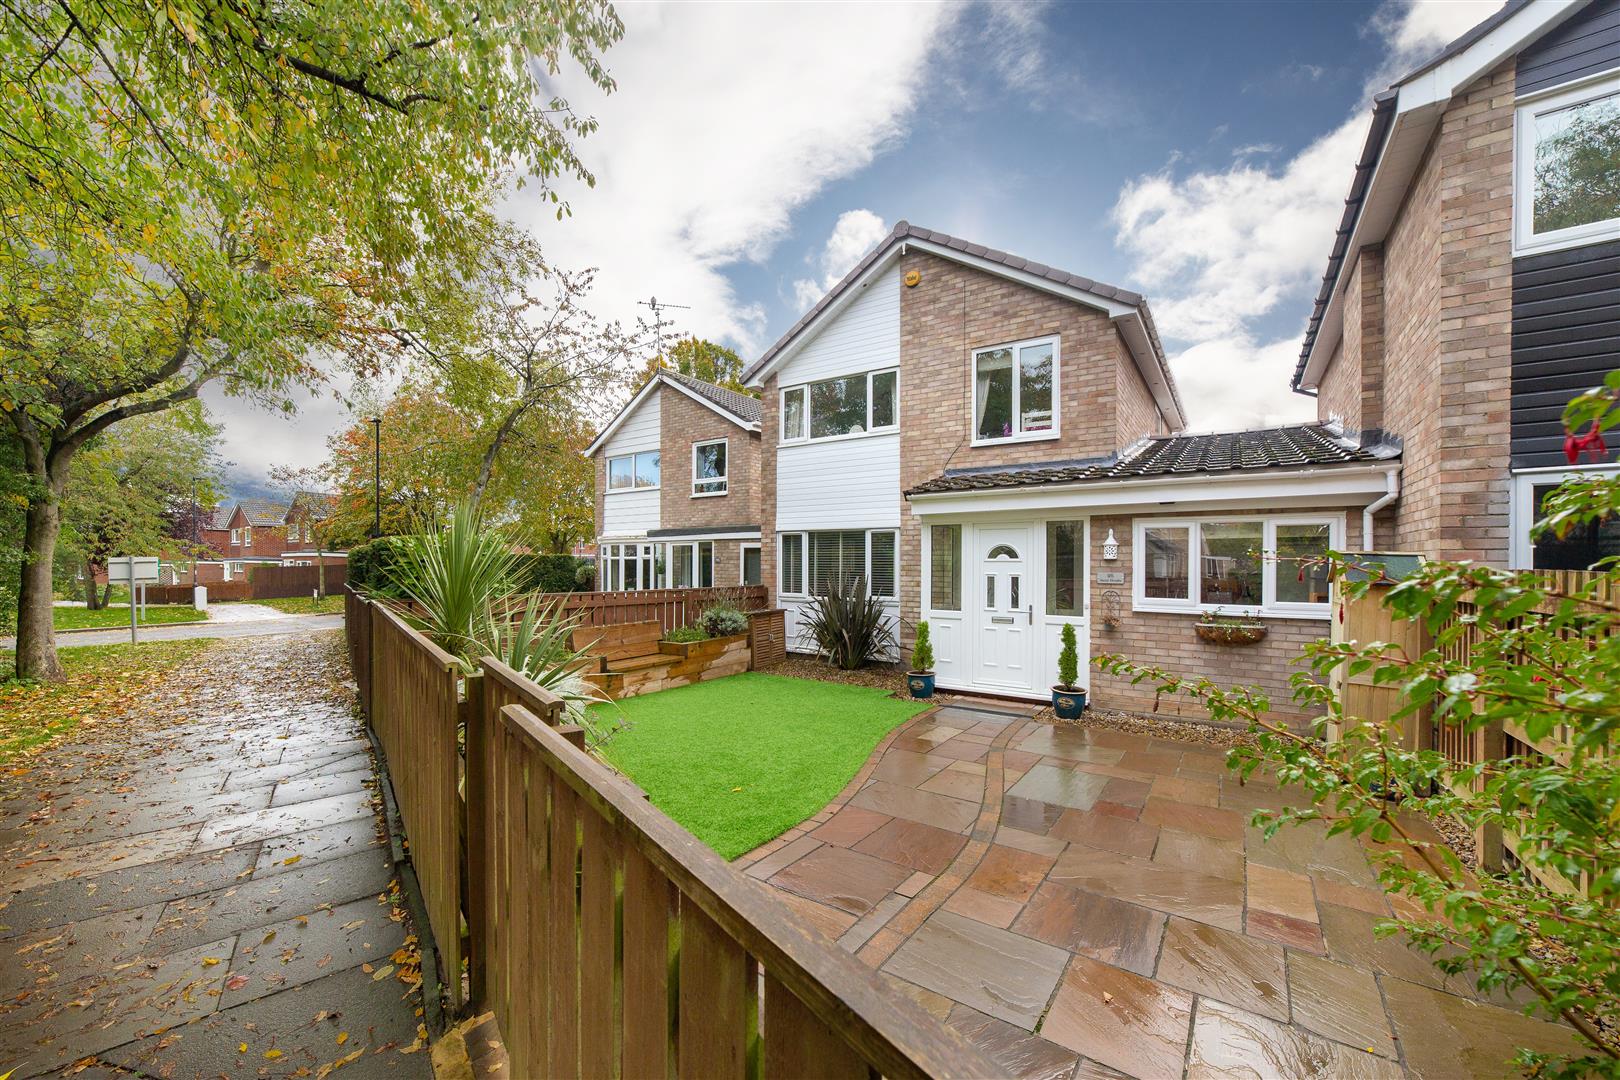 3 bed detached house for sale in Ascot Walk, Newcastle Upon Tyne - Property Image 1